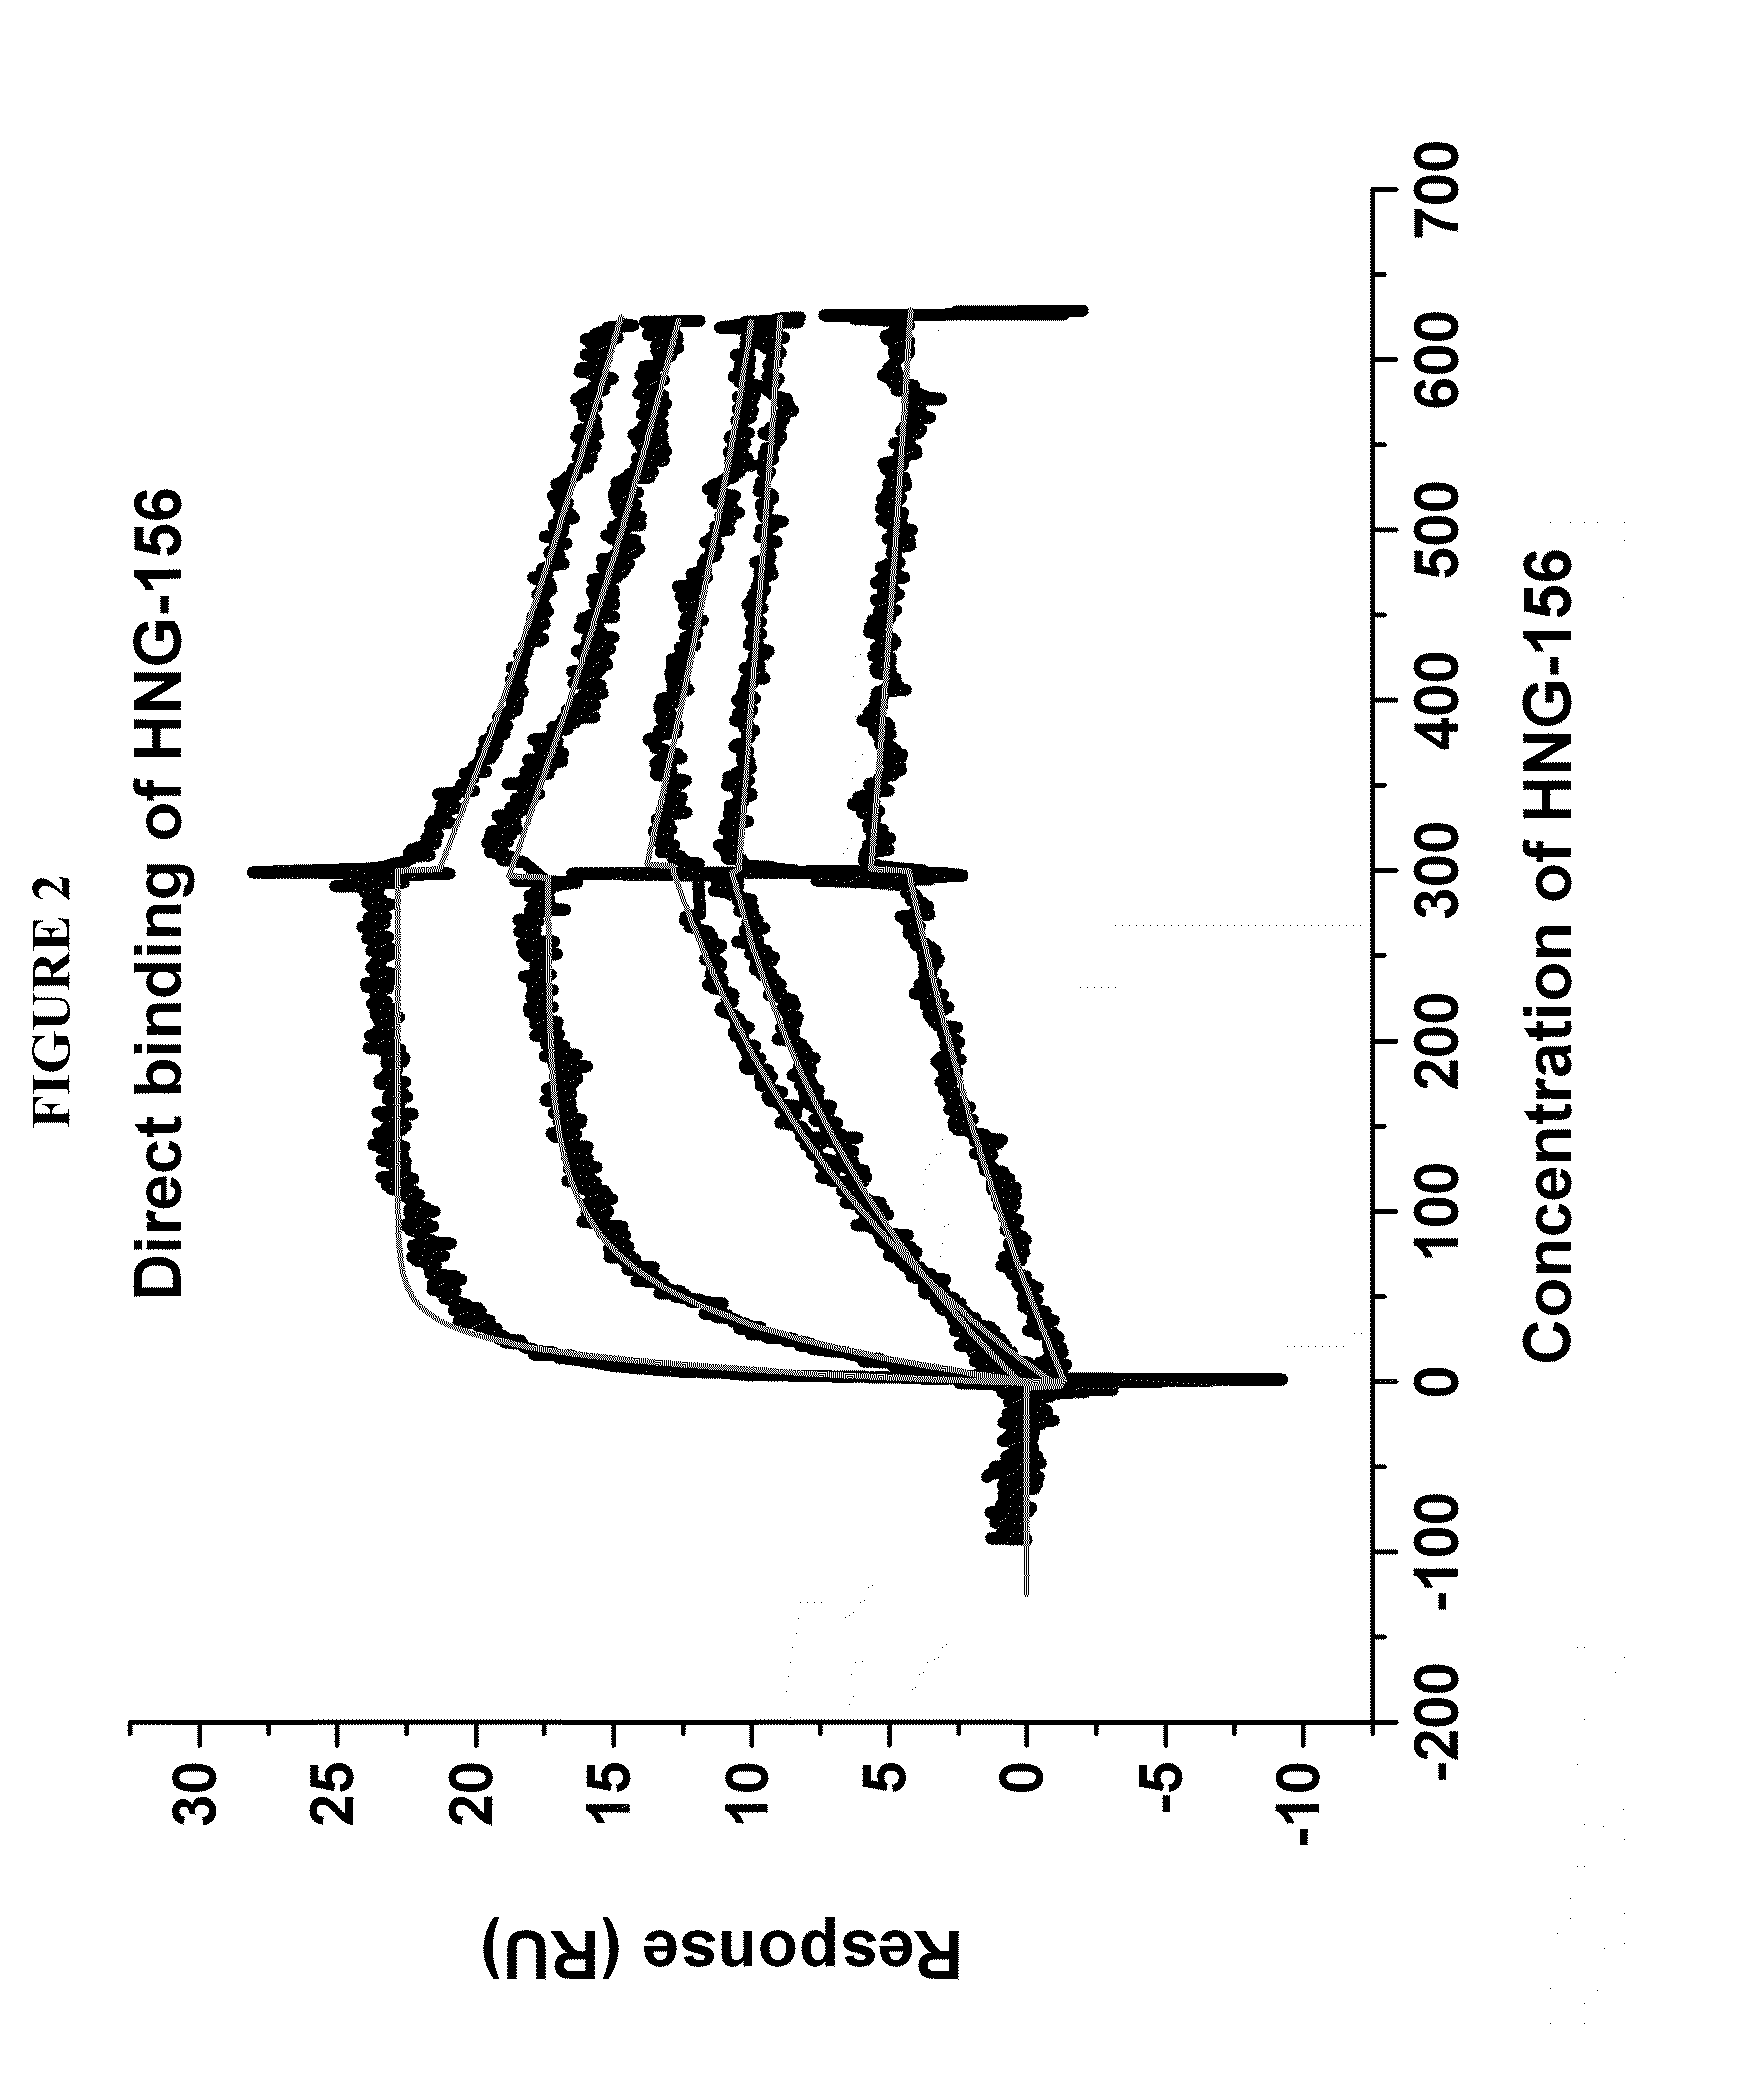 Active Cores of Peptide Triazole HIV-1 Entry Inhibitors